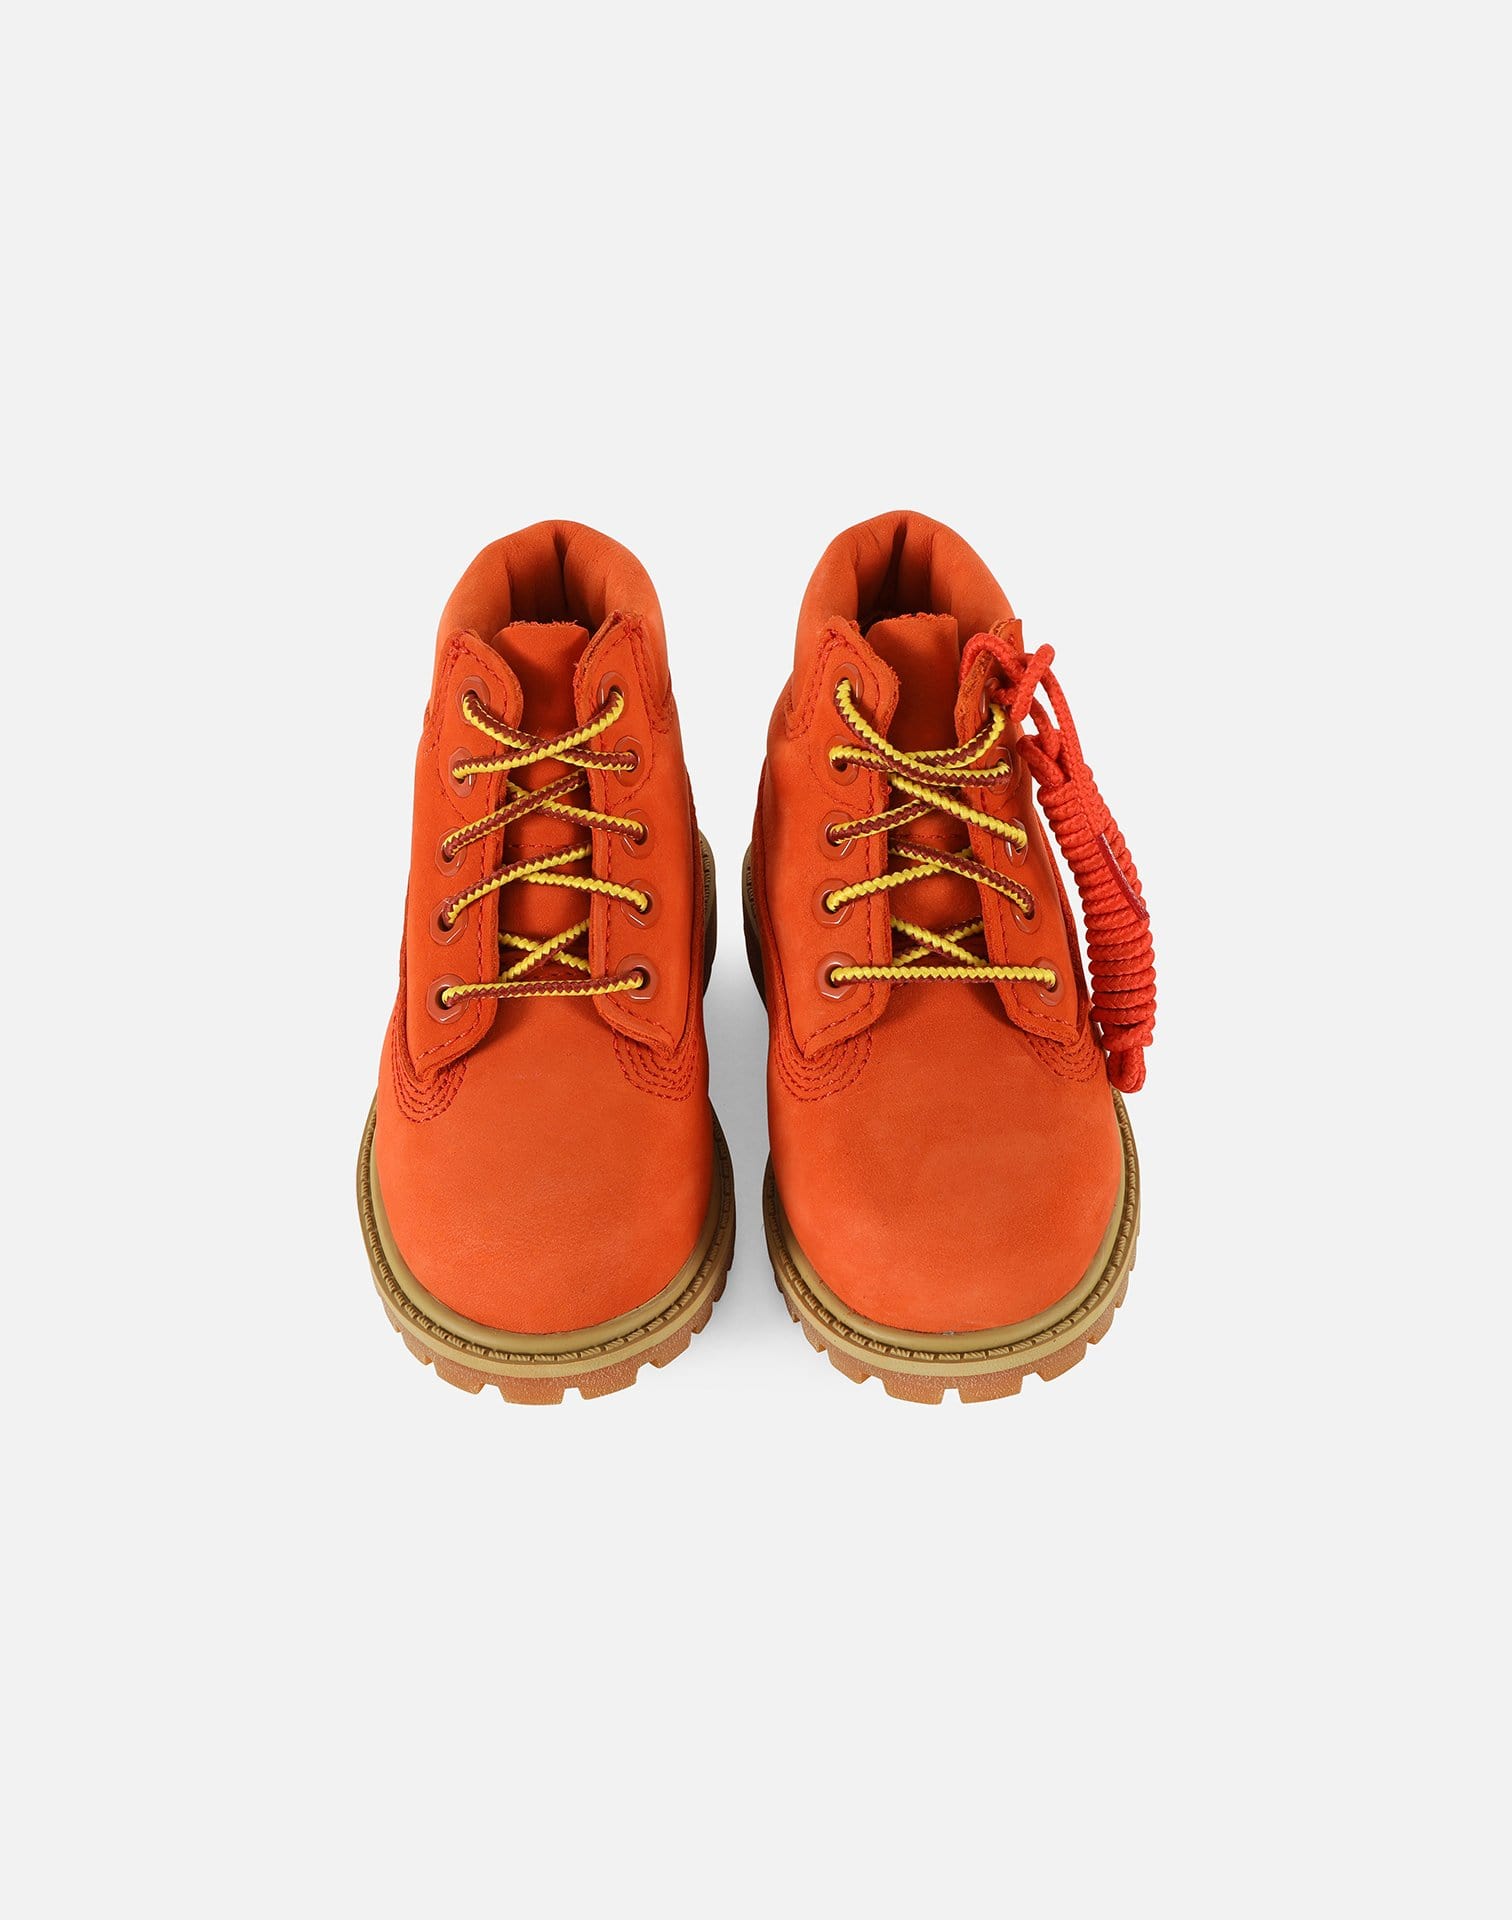 infant timberlands size 6